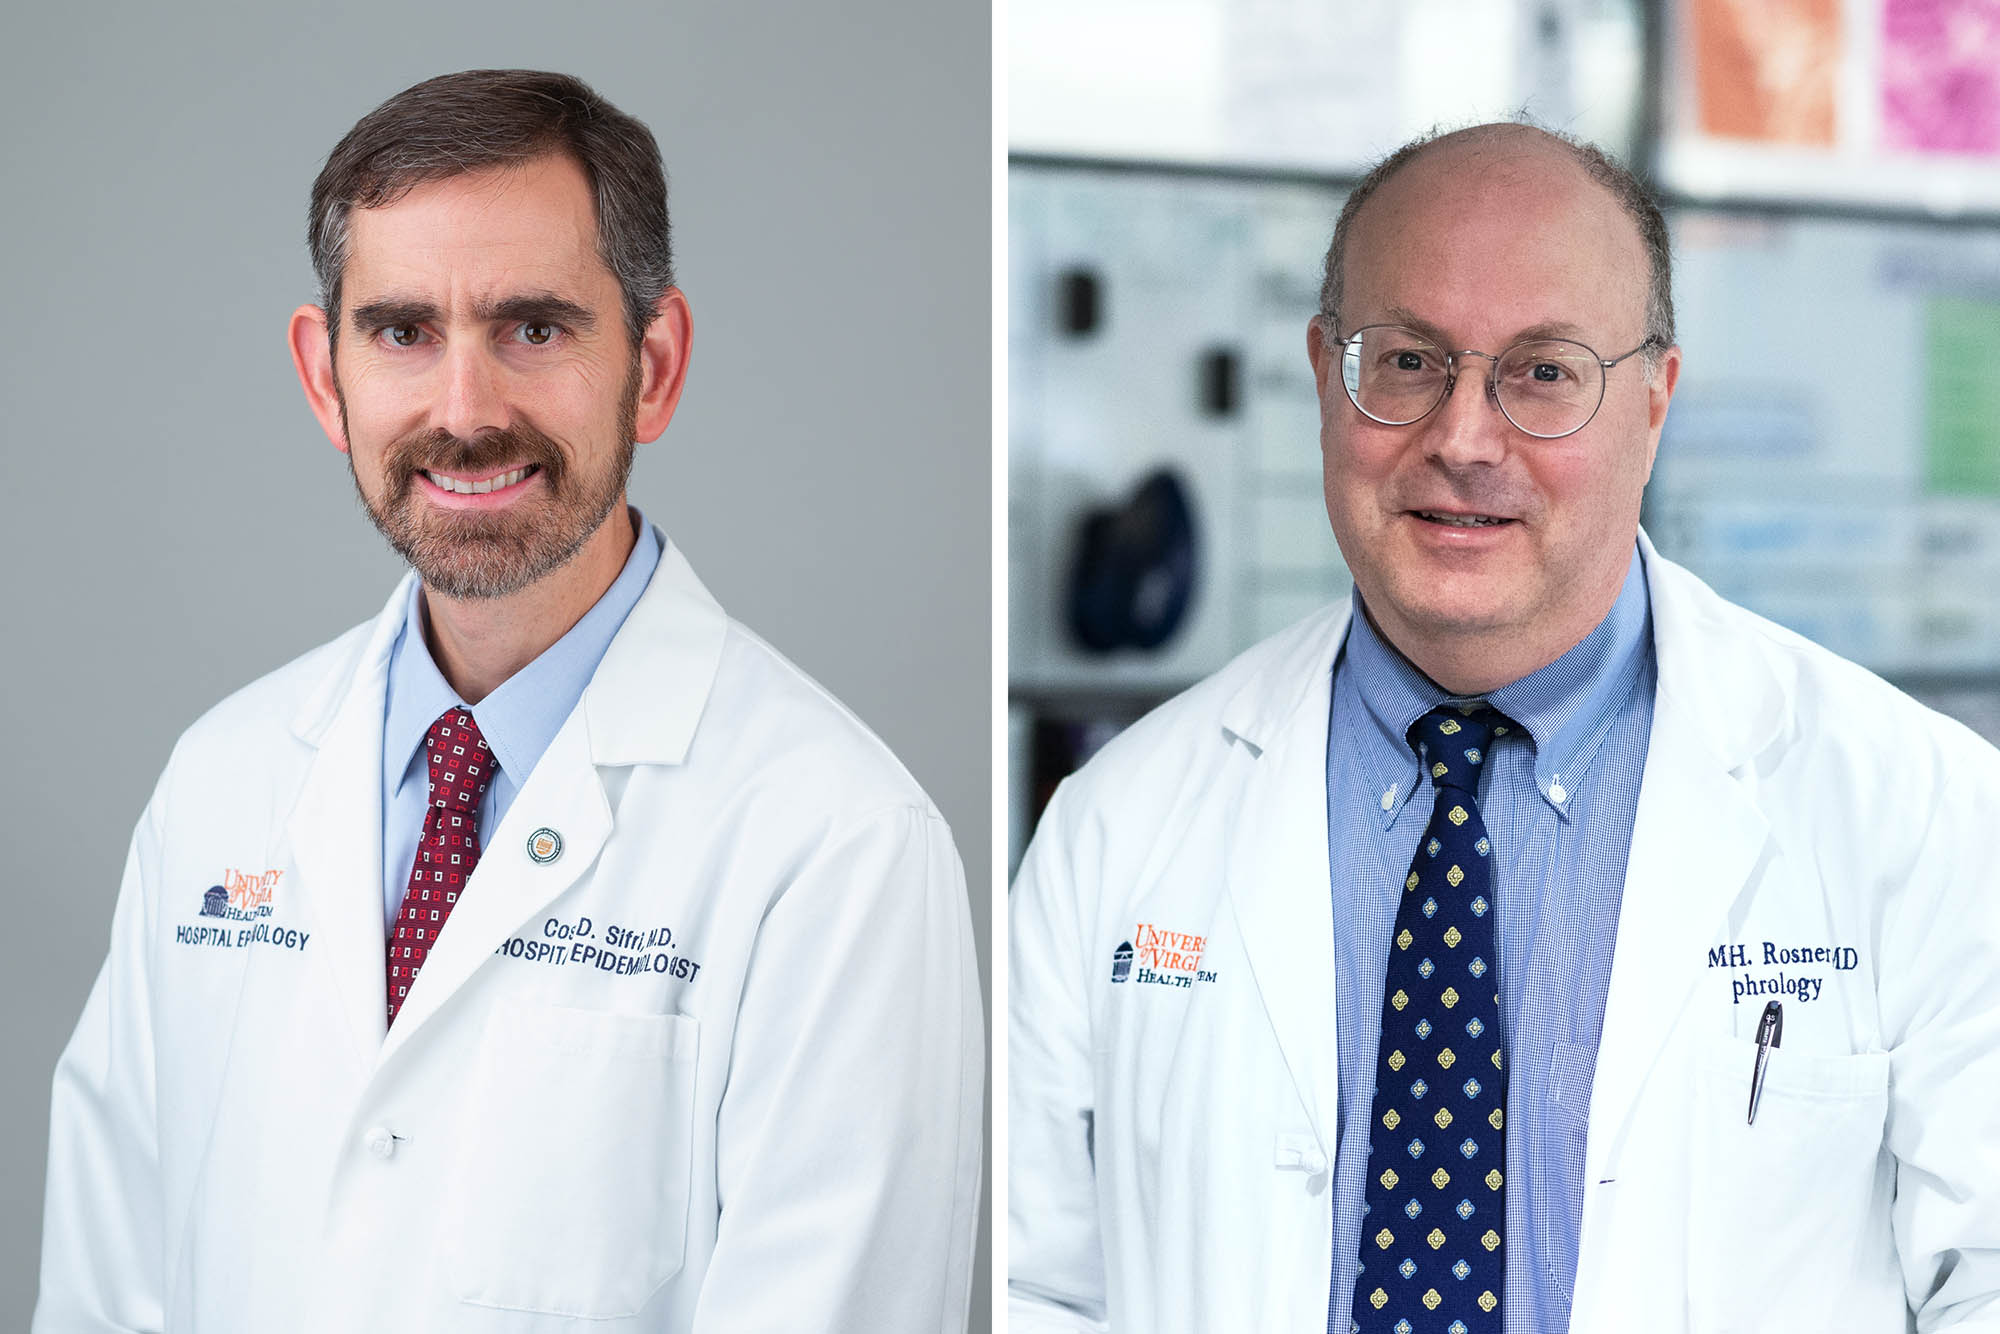 Headshots: Dr. Costi Sifri, left, Dr. Mitch Rosner, right